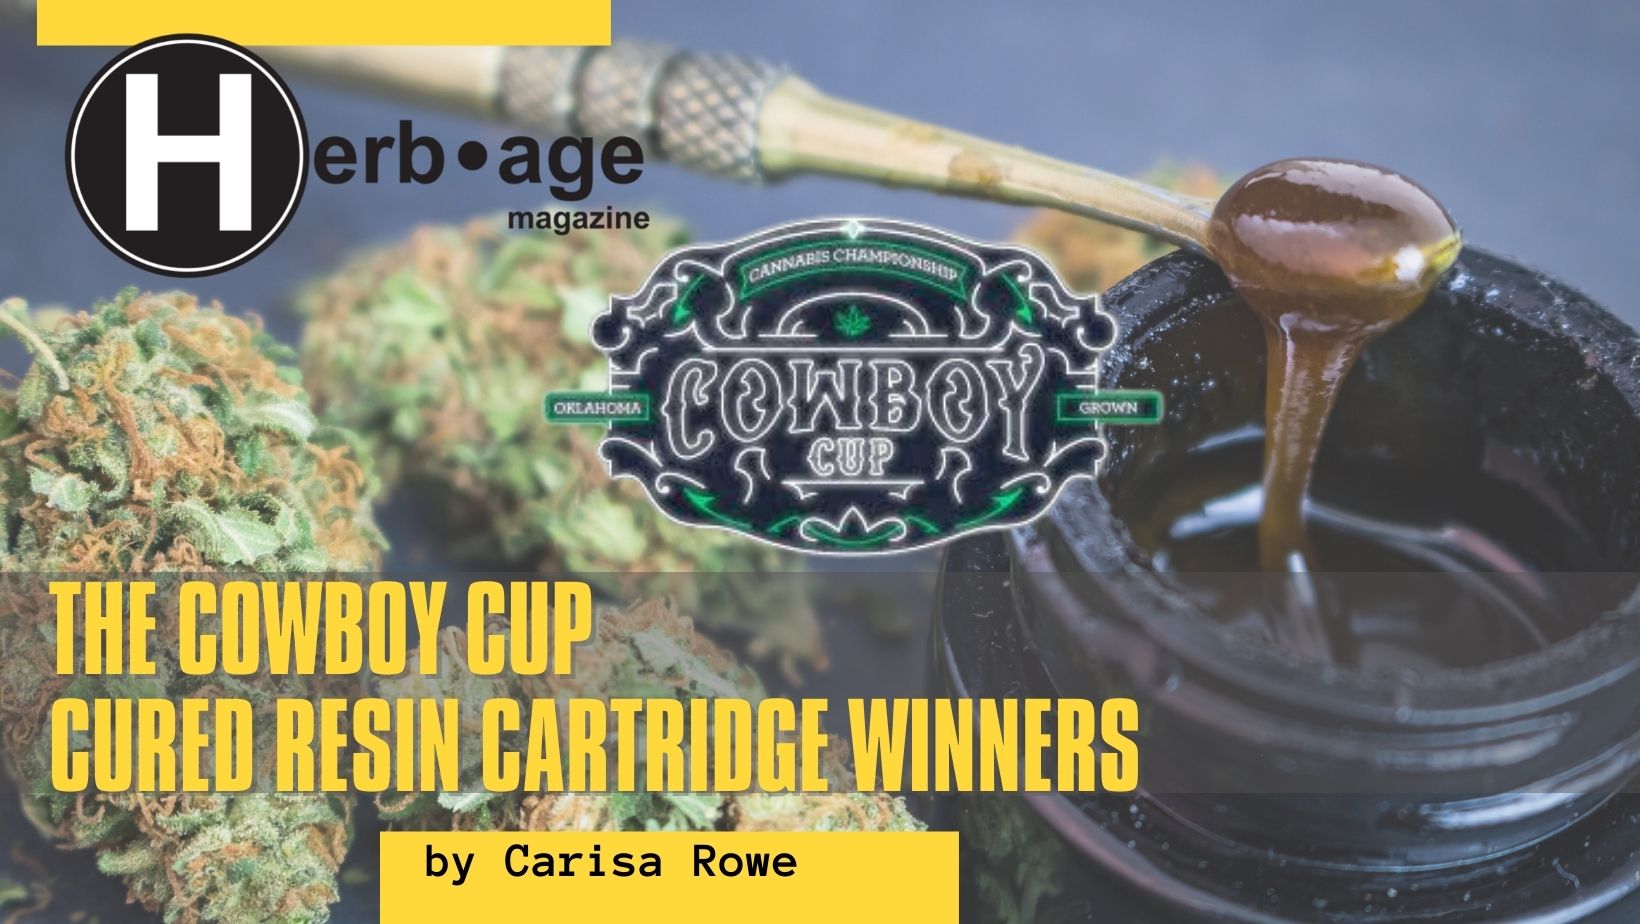 The Cowboy Cup  Cured Resin Cartridge Winners